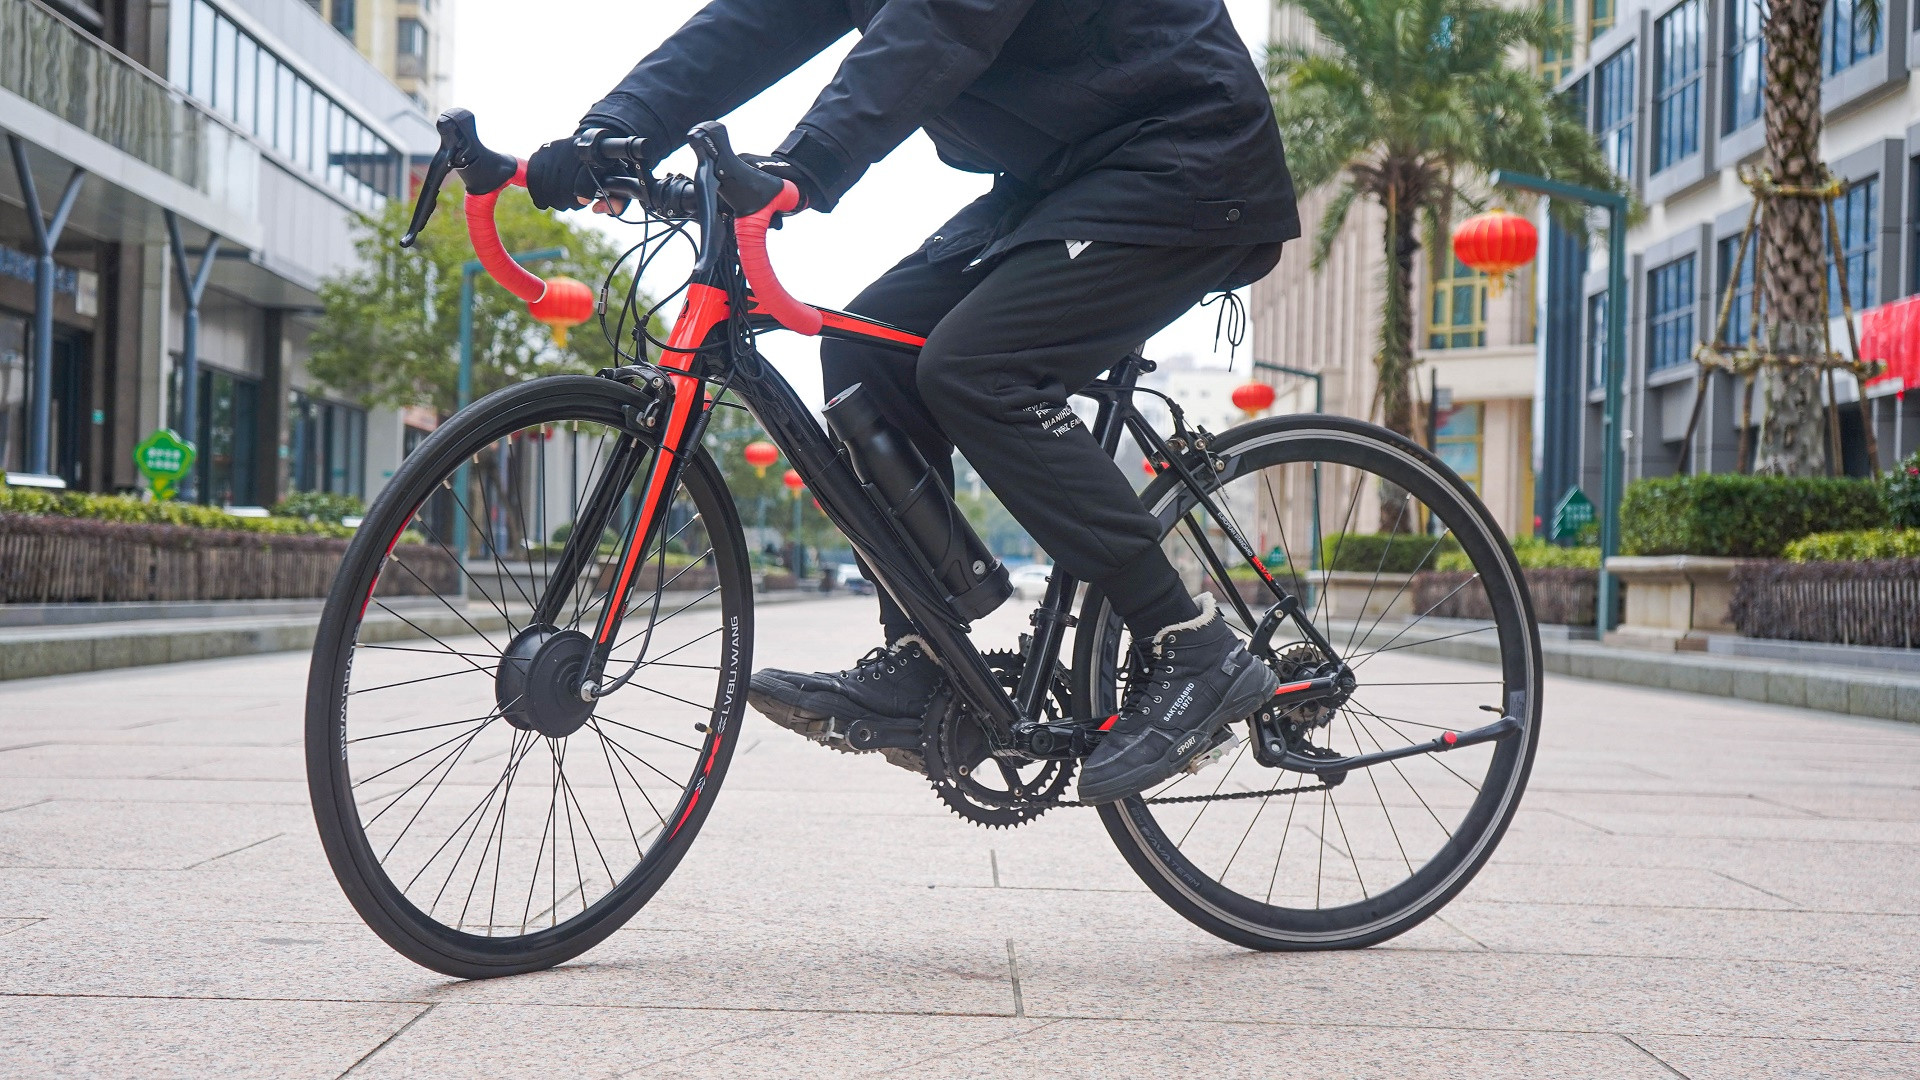 As an amateur cyclist, would you choose an electric-assist bicycle?